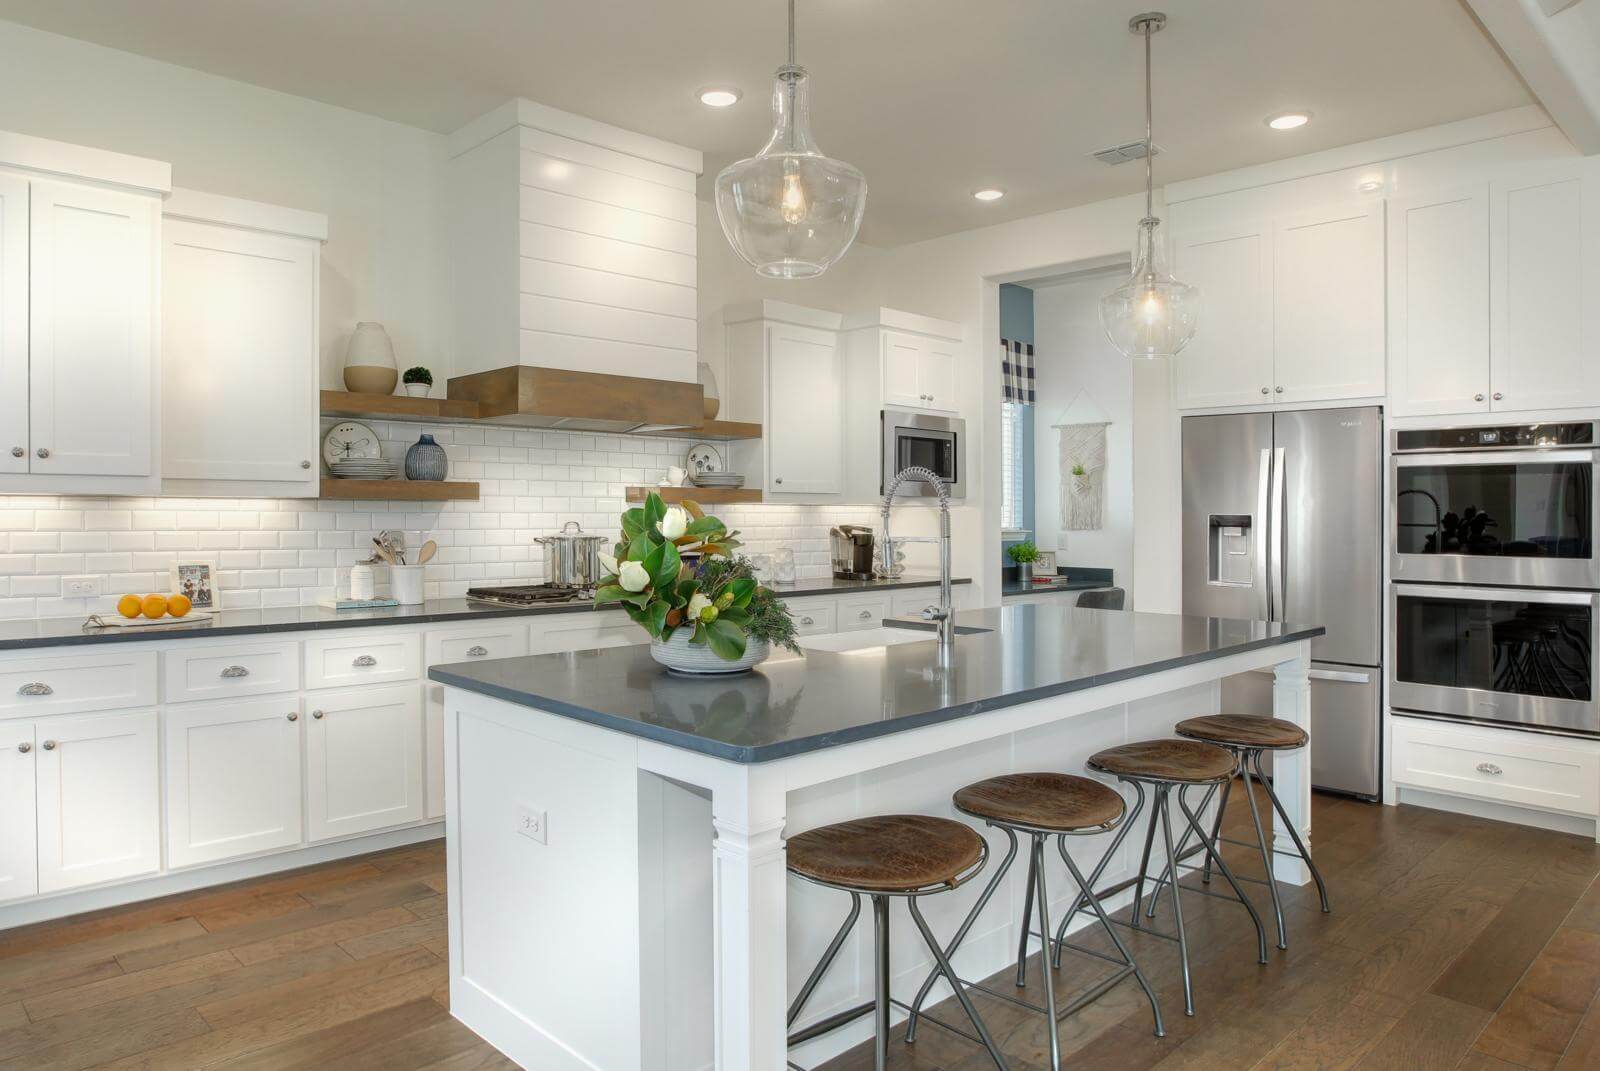 A white kitchen with a center island and stools, perfect for new homes seeking the tranquility of nature and nearby trails.